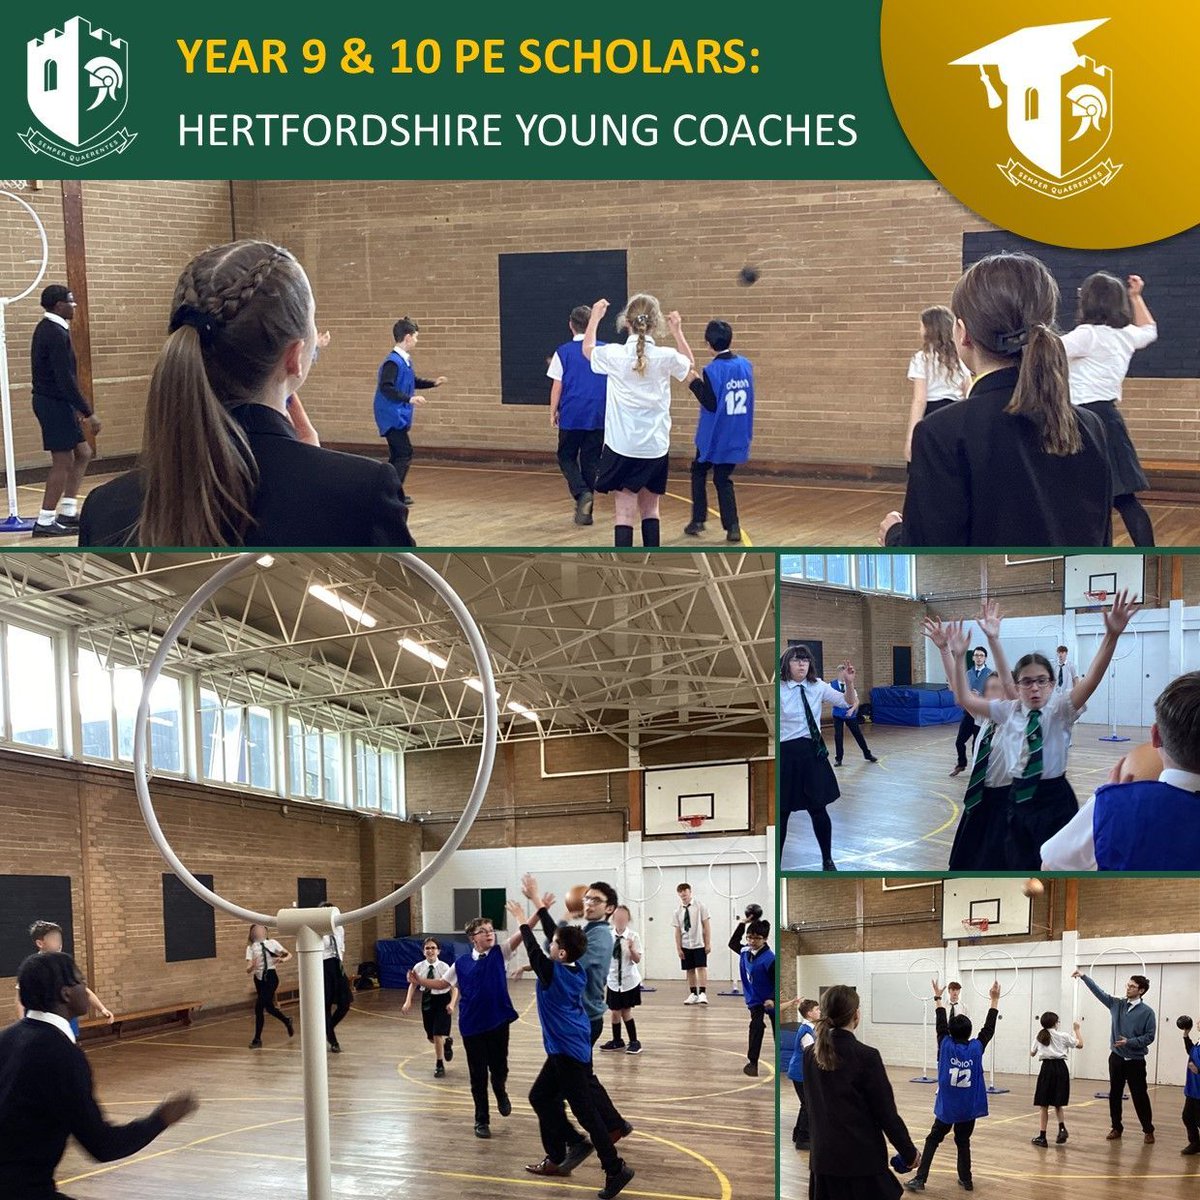 Our Year 9 and 10 PE scholars who have been completing their Hertfordshire Young Coaches qualification this week organised an exciting game of Quidditch for our Inclusion club members. #ambition #adeyfieldscholars #studentleadership #inclusion